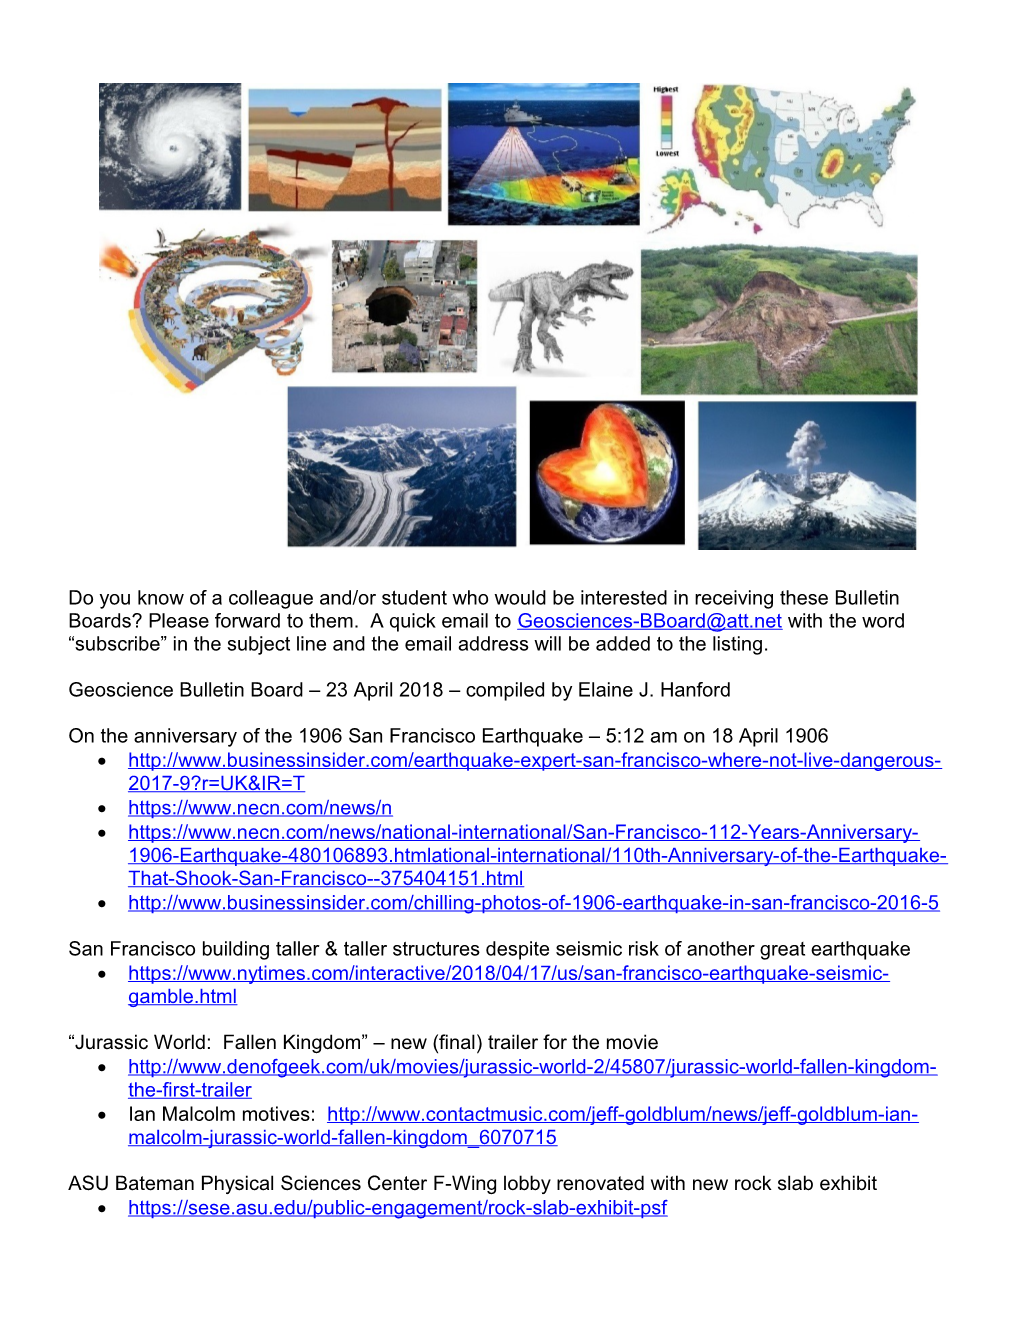 Geoscience Bulletin Board 23 April 2018 Compiled by Elaine J. Hanford